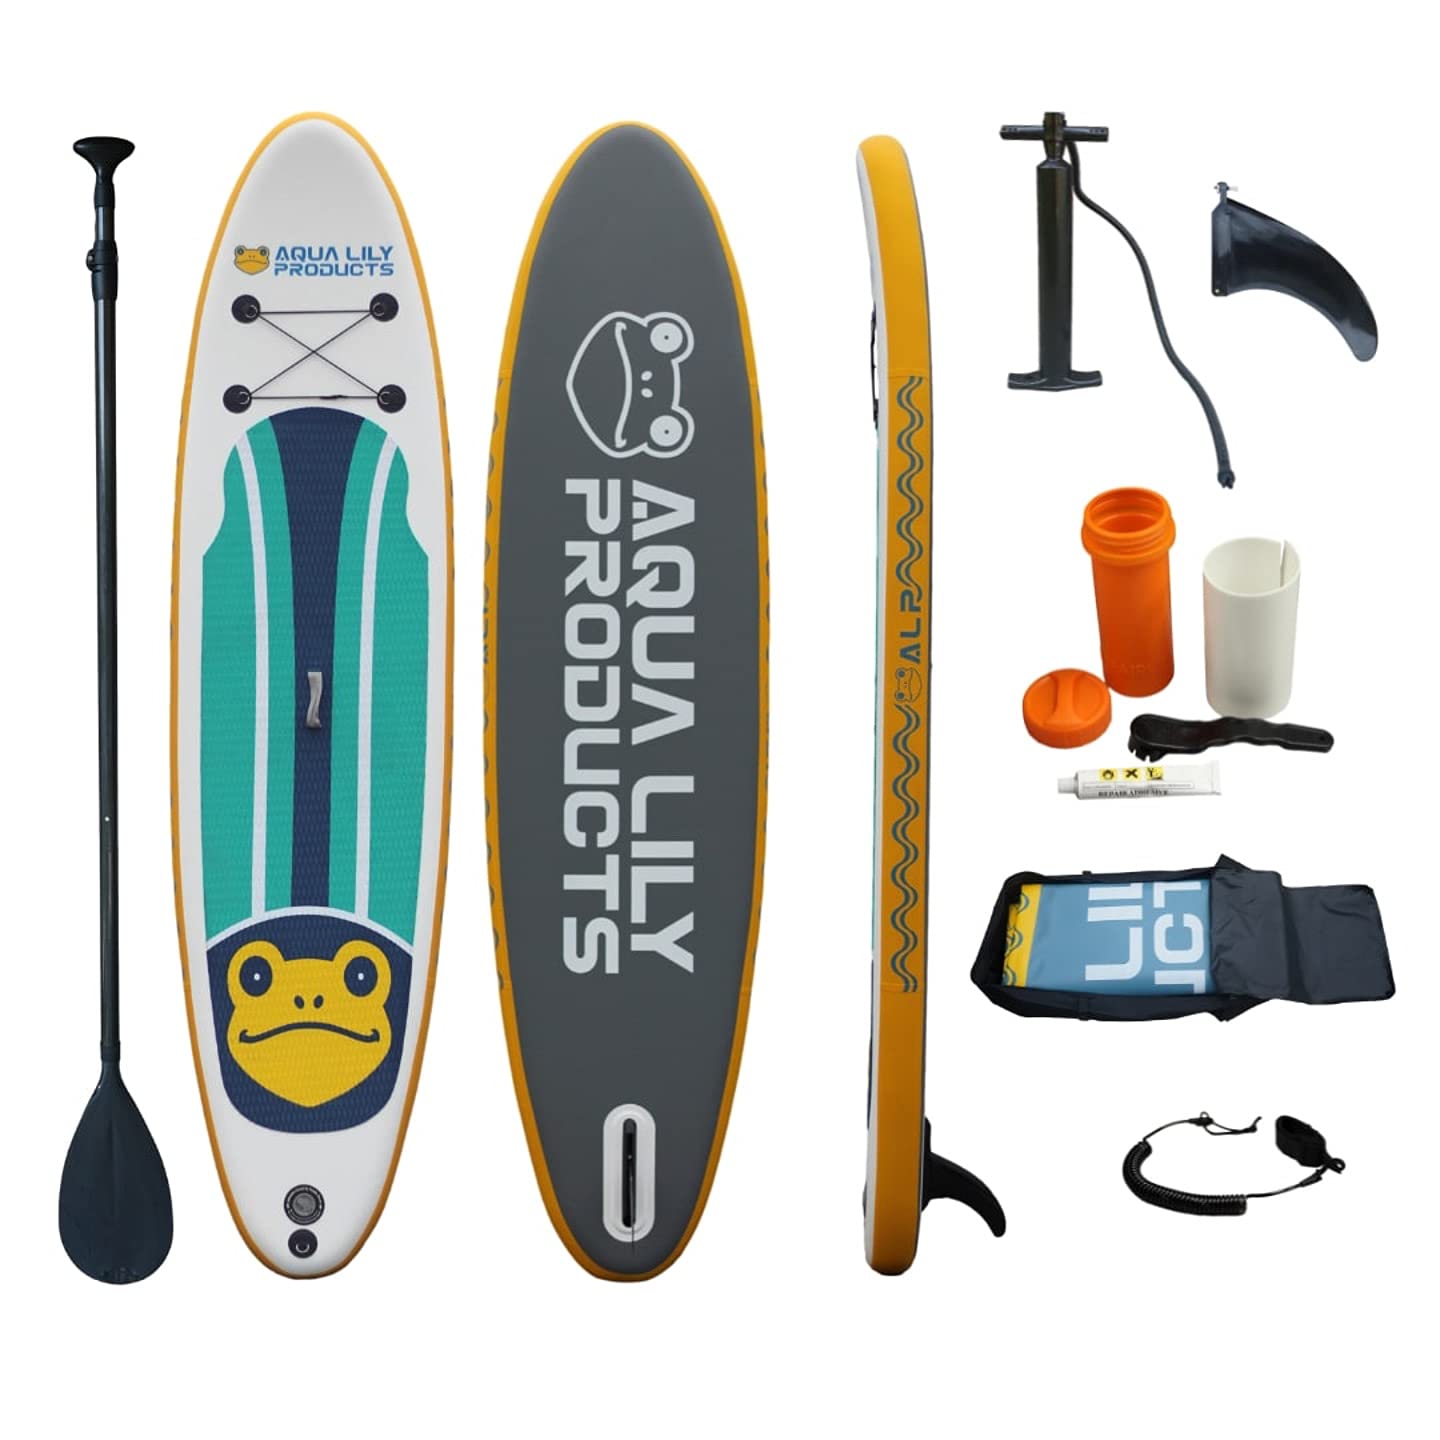 Aqua Lily Premium Inflatable Stand Up Paddle Board (Supports 400 Pounds) with SUP Accessories & Carry Bag | Wide Stance, Non-Slip Deck, Leash, Paddle & Pump, 109 x 32 x 6